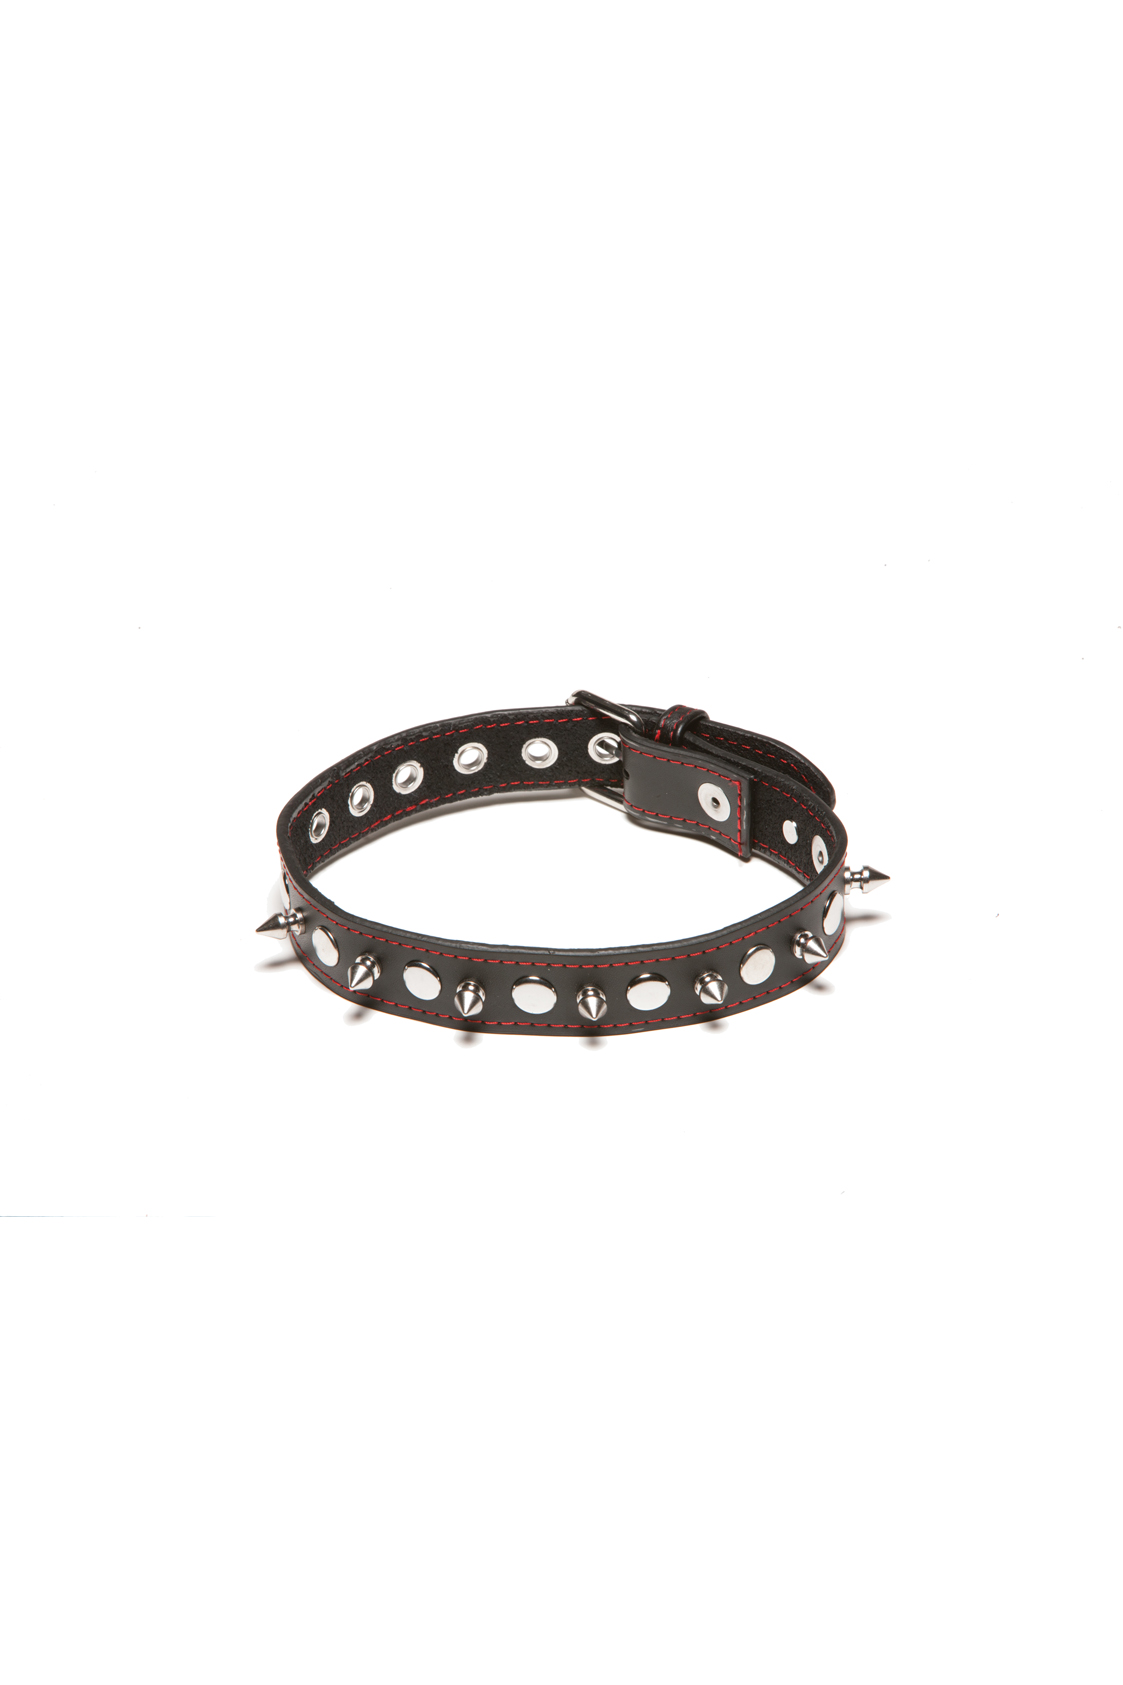 X-Play Spiked Leather Collar 2079